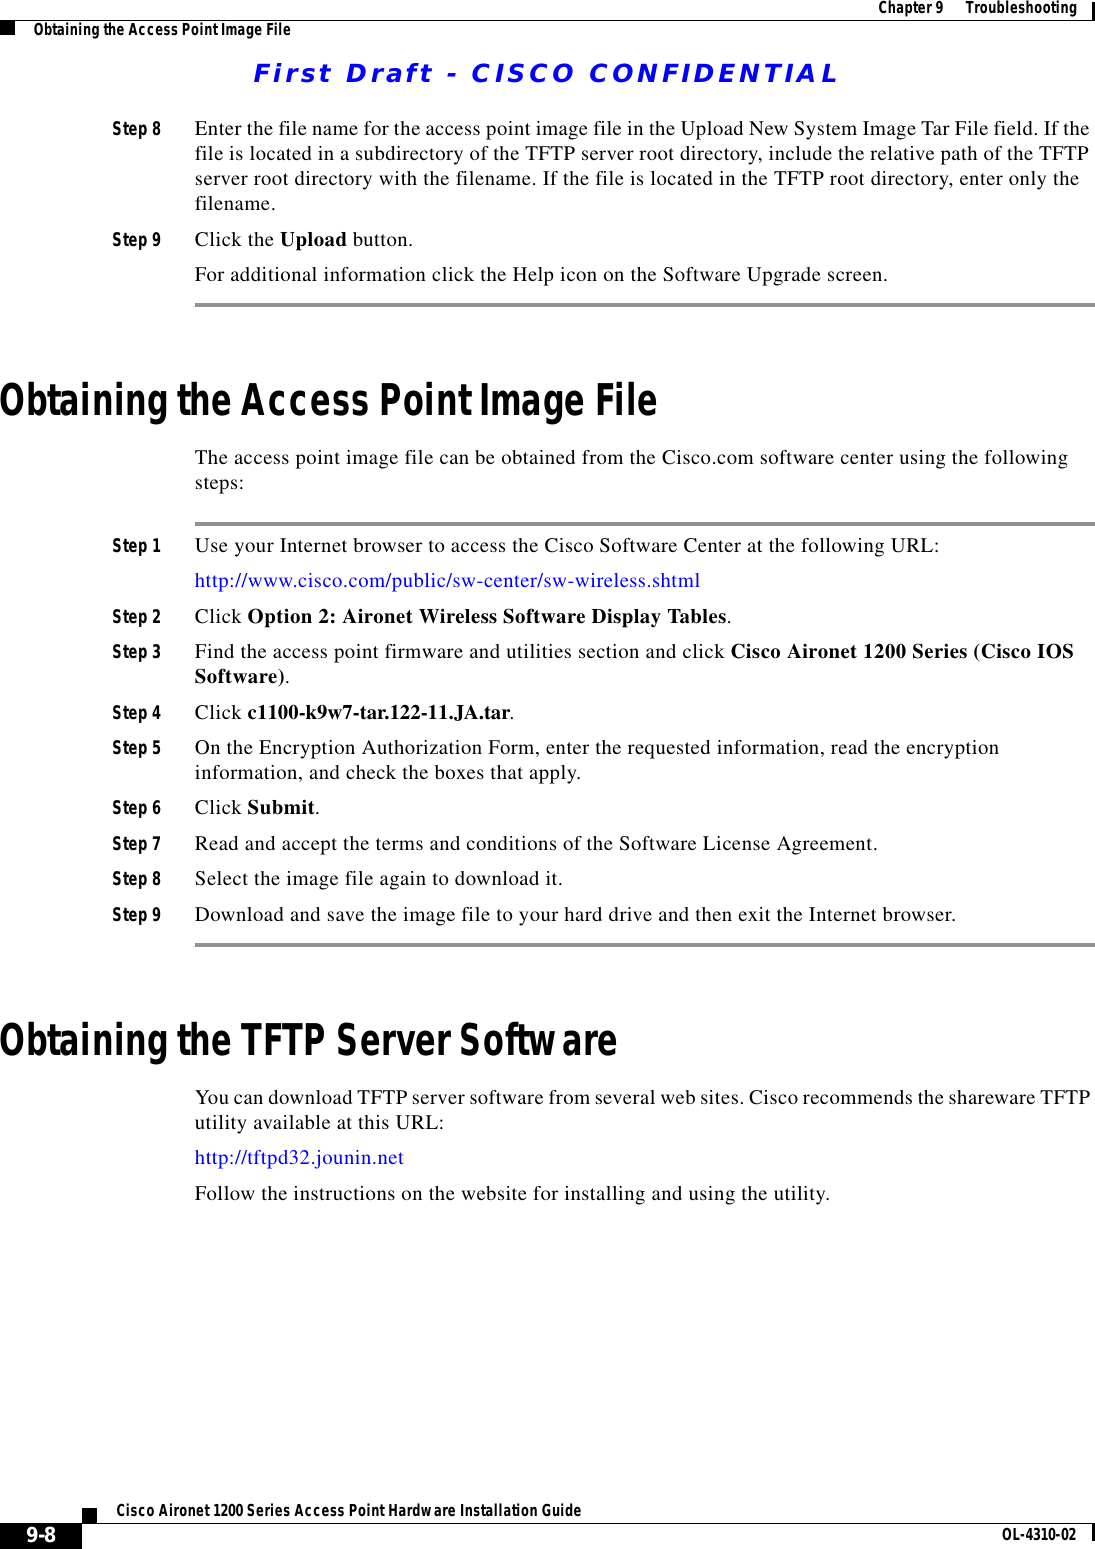 First Draft - CISCO CONFIDENTIAL9-8Cisco Aironet 1200 Series Access Point Hardware Installation Guide OL-4310-02Chapter9      TroubleshootingObtaining the Access Point Image FileStep 8 Enter the file name for the access point image file in the Upload New System Image Tar File field. If the file is located in a subdirectory of the TFTP server root directory, include the relative path of the TFTP server root directory with the filename. If the file is located in the TFTP root directory, enter only the filename.Step 9 Click the Upload button.For additional information click the Help icon on the Software Upgrade screen. Obtaining the Access Point Image FileThe access point image file can be obtained from the Cisco.com software center using the following steps:Step 1 Use your Internet browser to access the Cisco Software Center at the following URL:http://www.cisco.com/public/sw-center/sw-wireless.shtmlStep 2 Click Option 2: Aironet Wireless Software Display Tables.Step 3 Find the access point firmware and utilities section and click Cisco Aironet 1200 Series (Cisco IOS Software).Step 4 Click c1100-k9w7-tar.122-11.JA.tar. Step 5 On the Encryption Authorization Form, enter the requested information, read the encryption information, and check the boxes that apply.Step 6 Click Submit.Step 7 Read and accept the terms and conditions of the Software License Agreement.Step 8 Select the image file again to download it.Step 9 Download and save the image file to your hard drive and then exit the Internet browser. Obtaining the TFTP Server SoftwareYou can download TFTP server software from several web sites. Cisco recommends the shareware TFTP utility available at this URL:http://tftpd32.jounin.netFollow the instructions on the website for installing and using the utility.